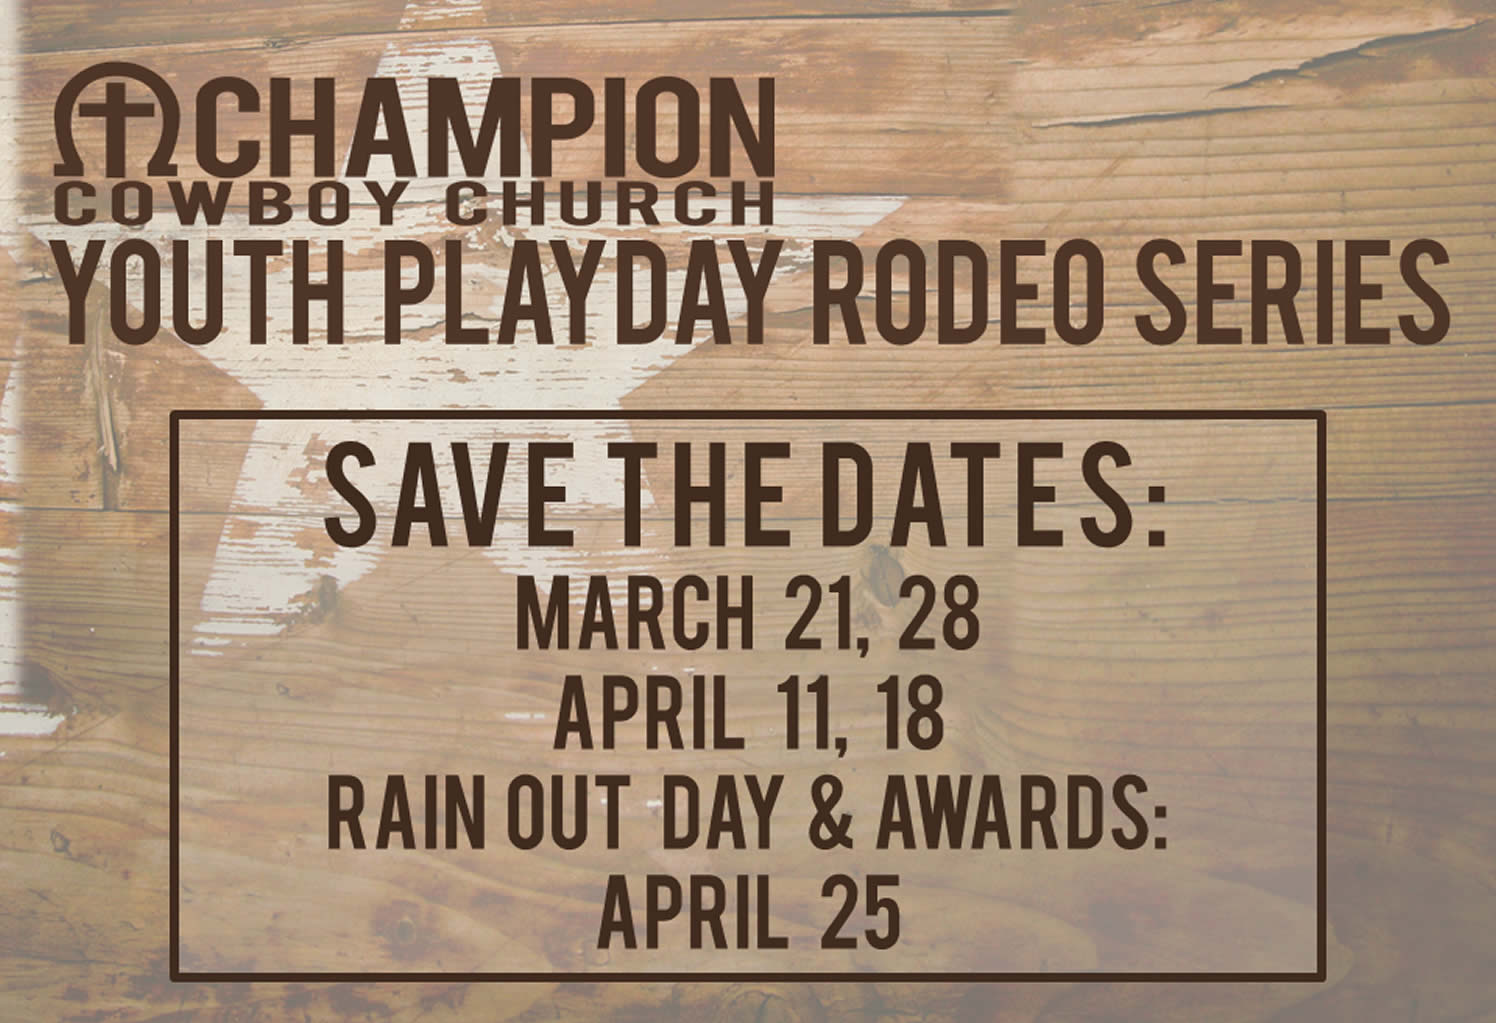 Youth Playday Rodeo Series